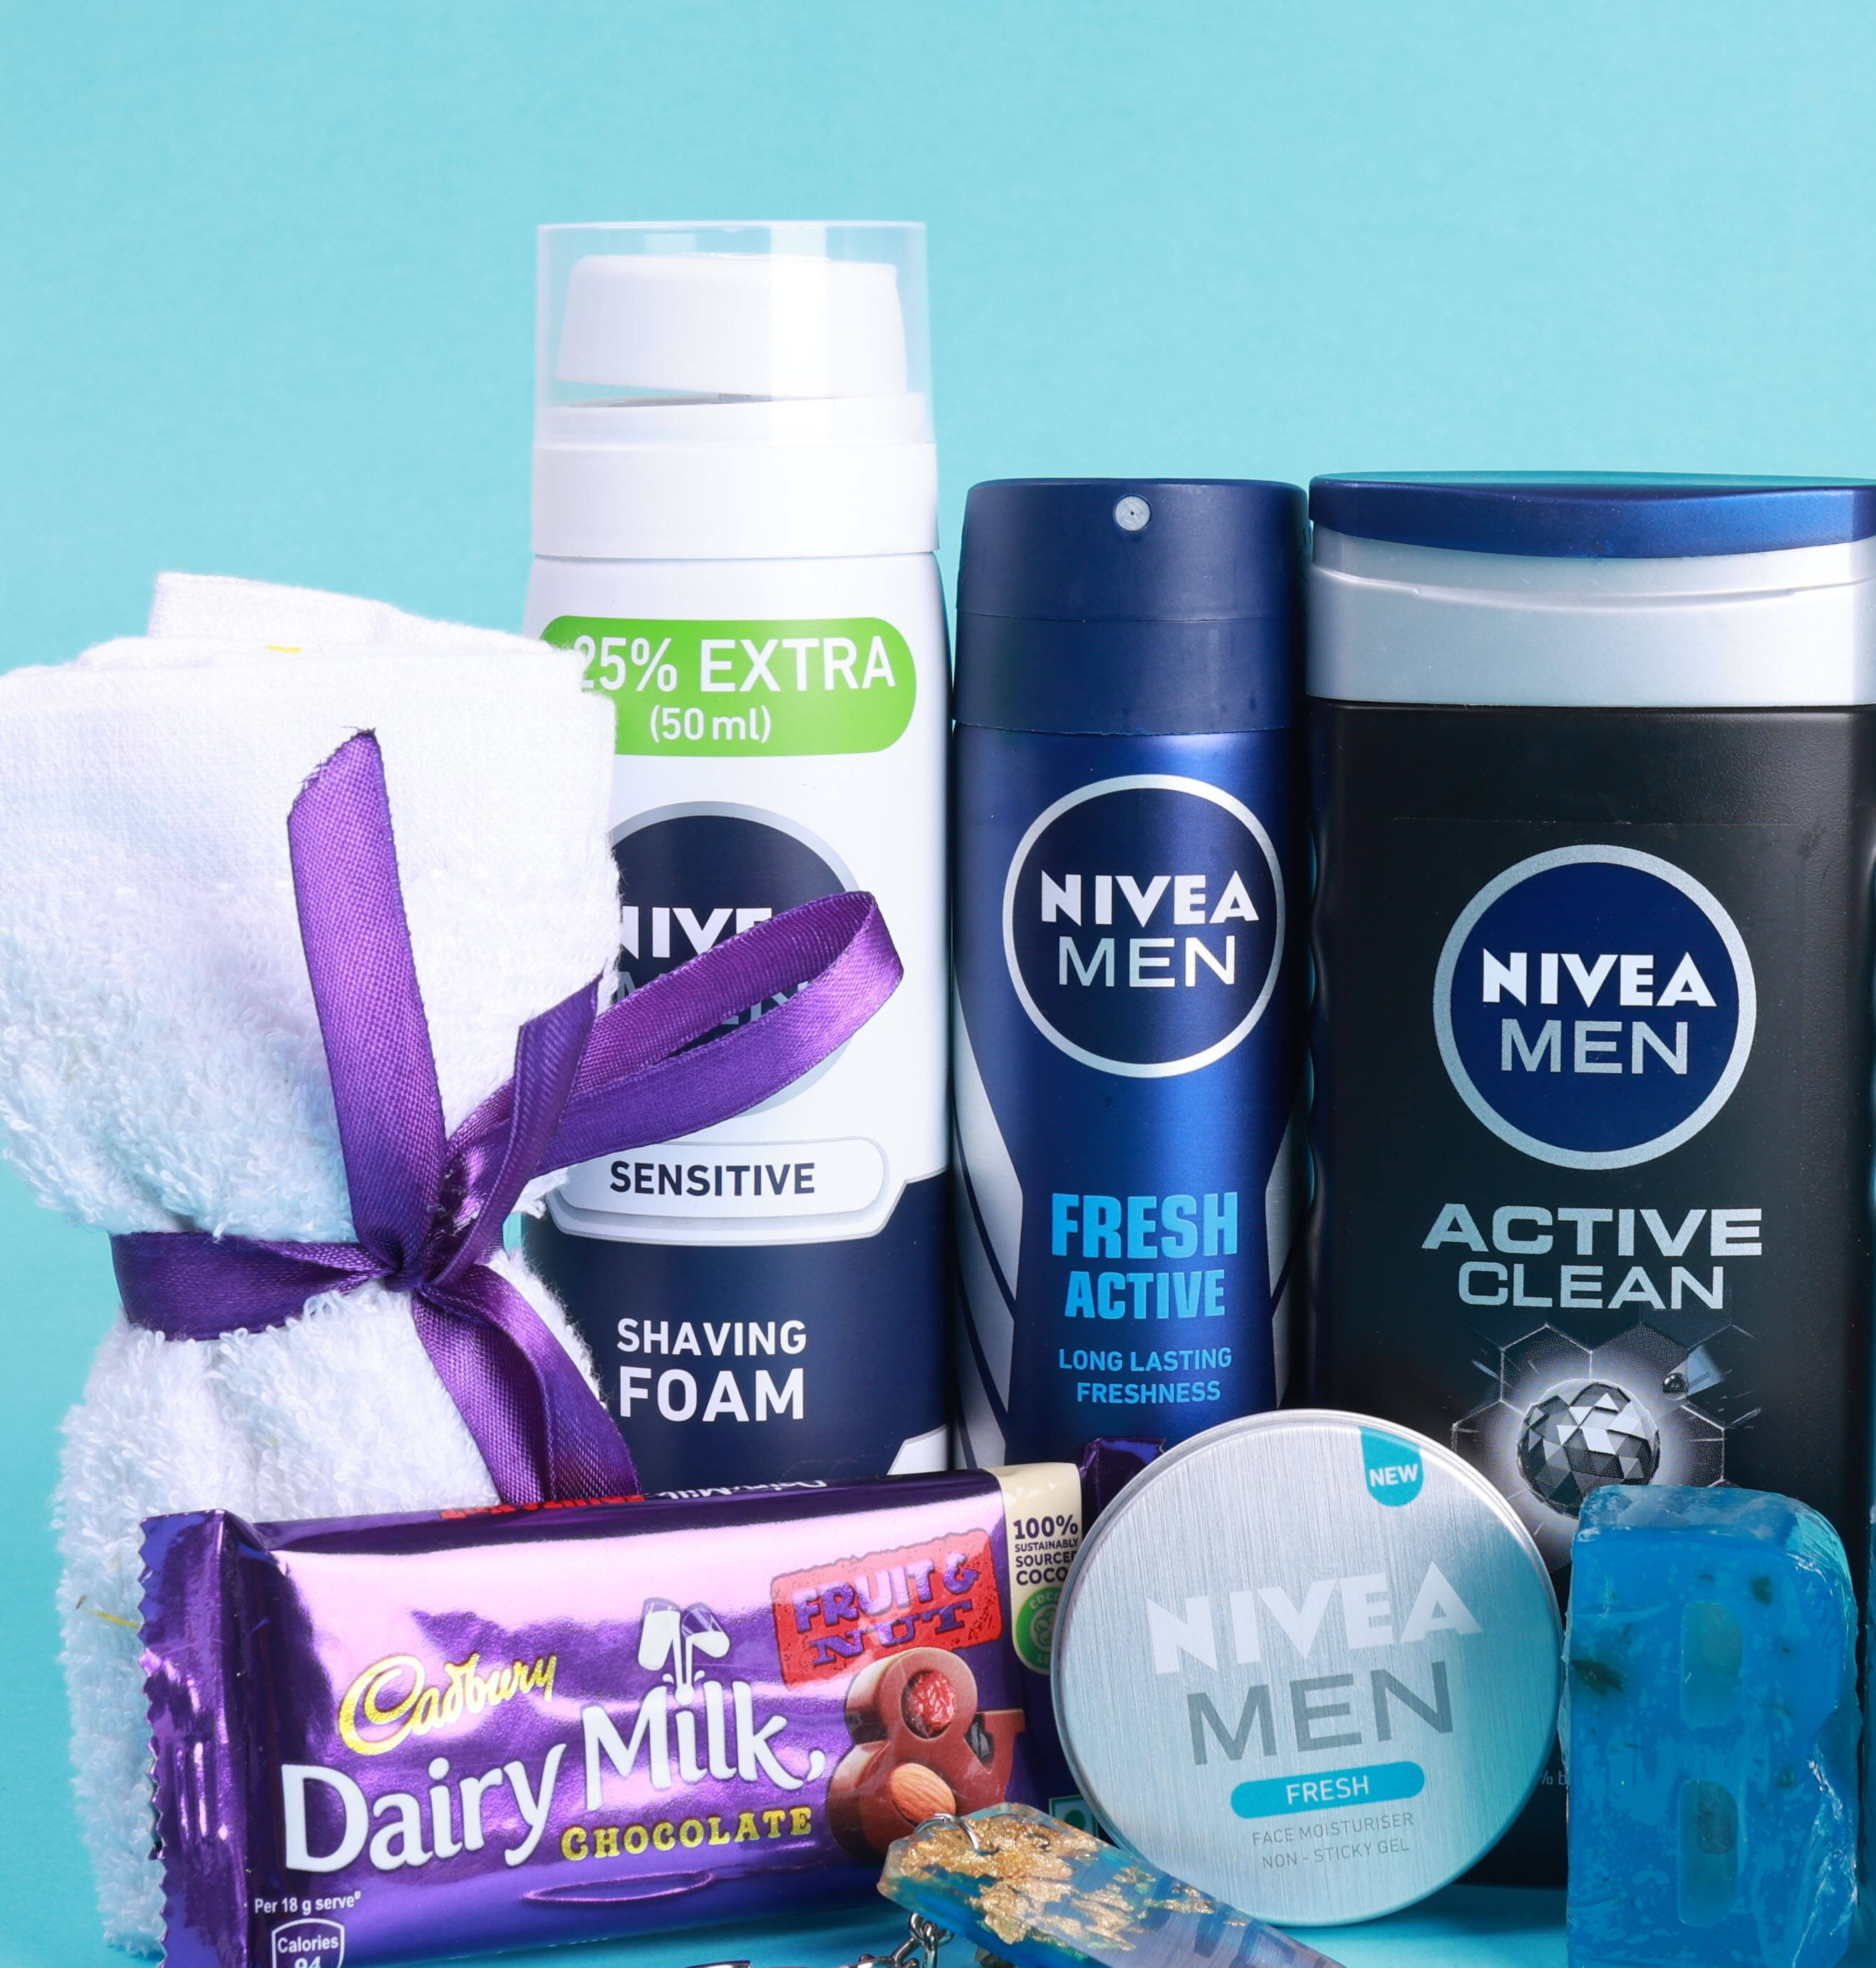 Nivea gift set for men❣️ Order from sudan 🇸🇩 to qatar 🇶🇦 We're  available in 🇦🇪 🇶🇦 🇮🇳 . Delivery available all over the world 🌎… |  Instagram